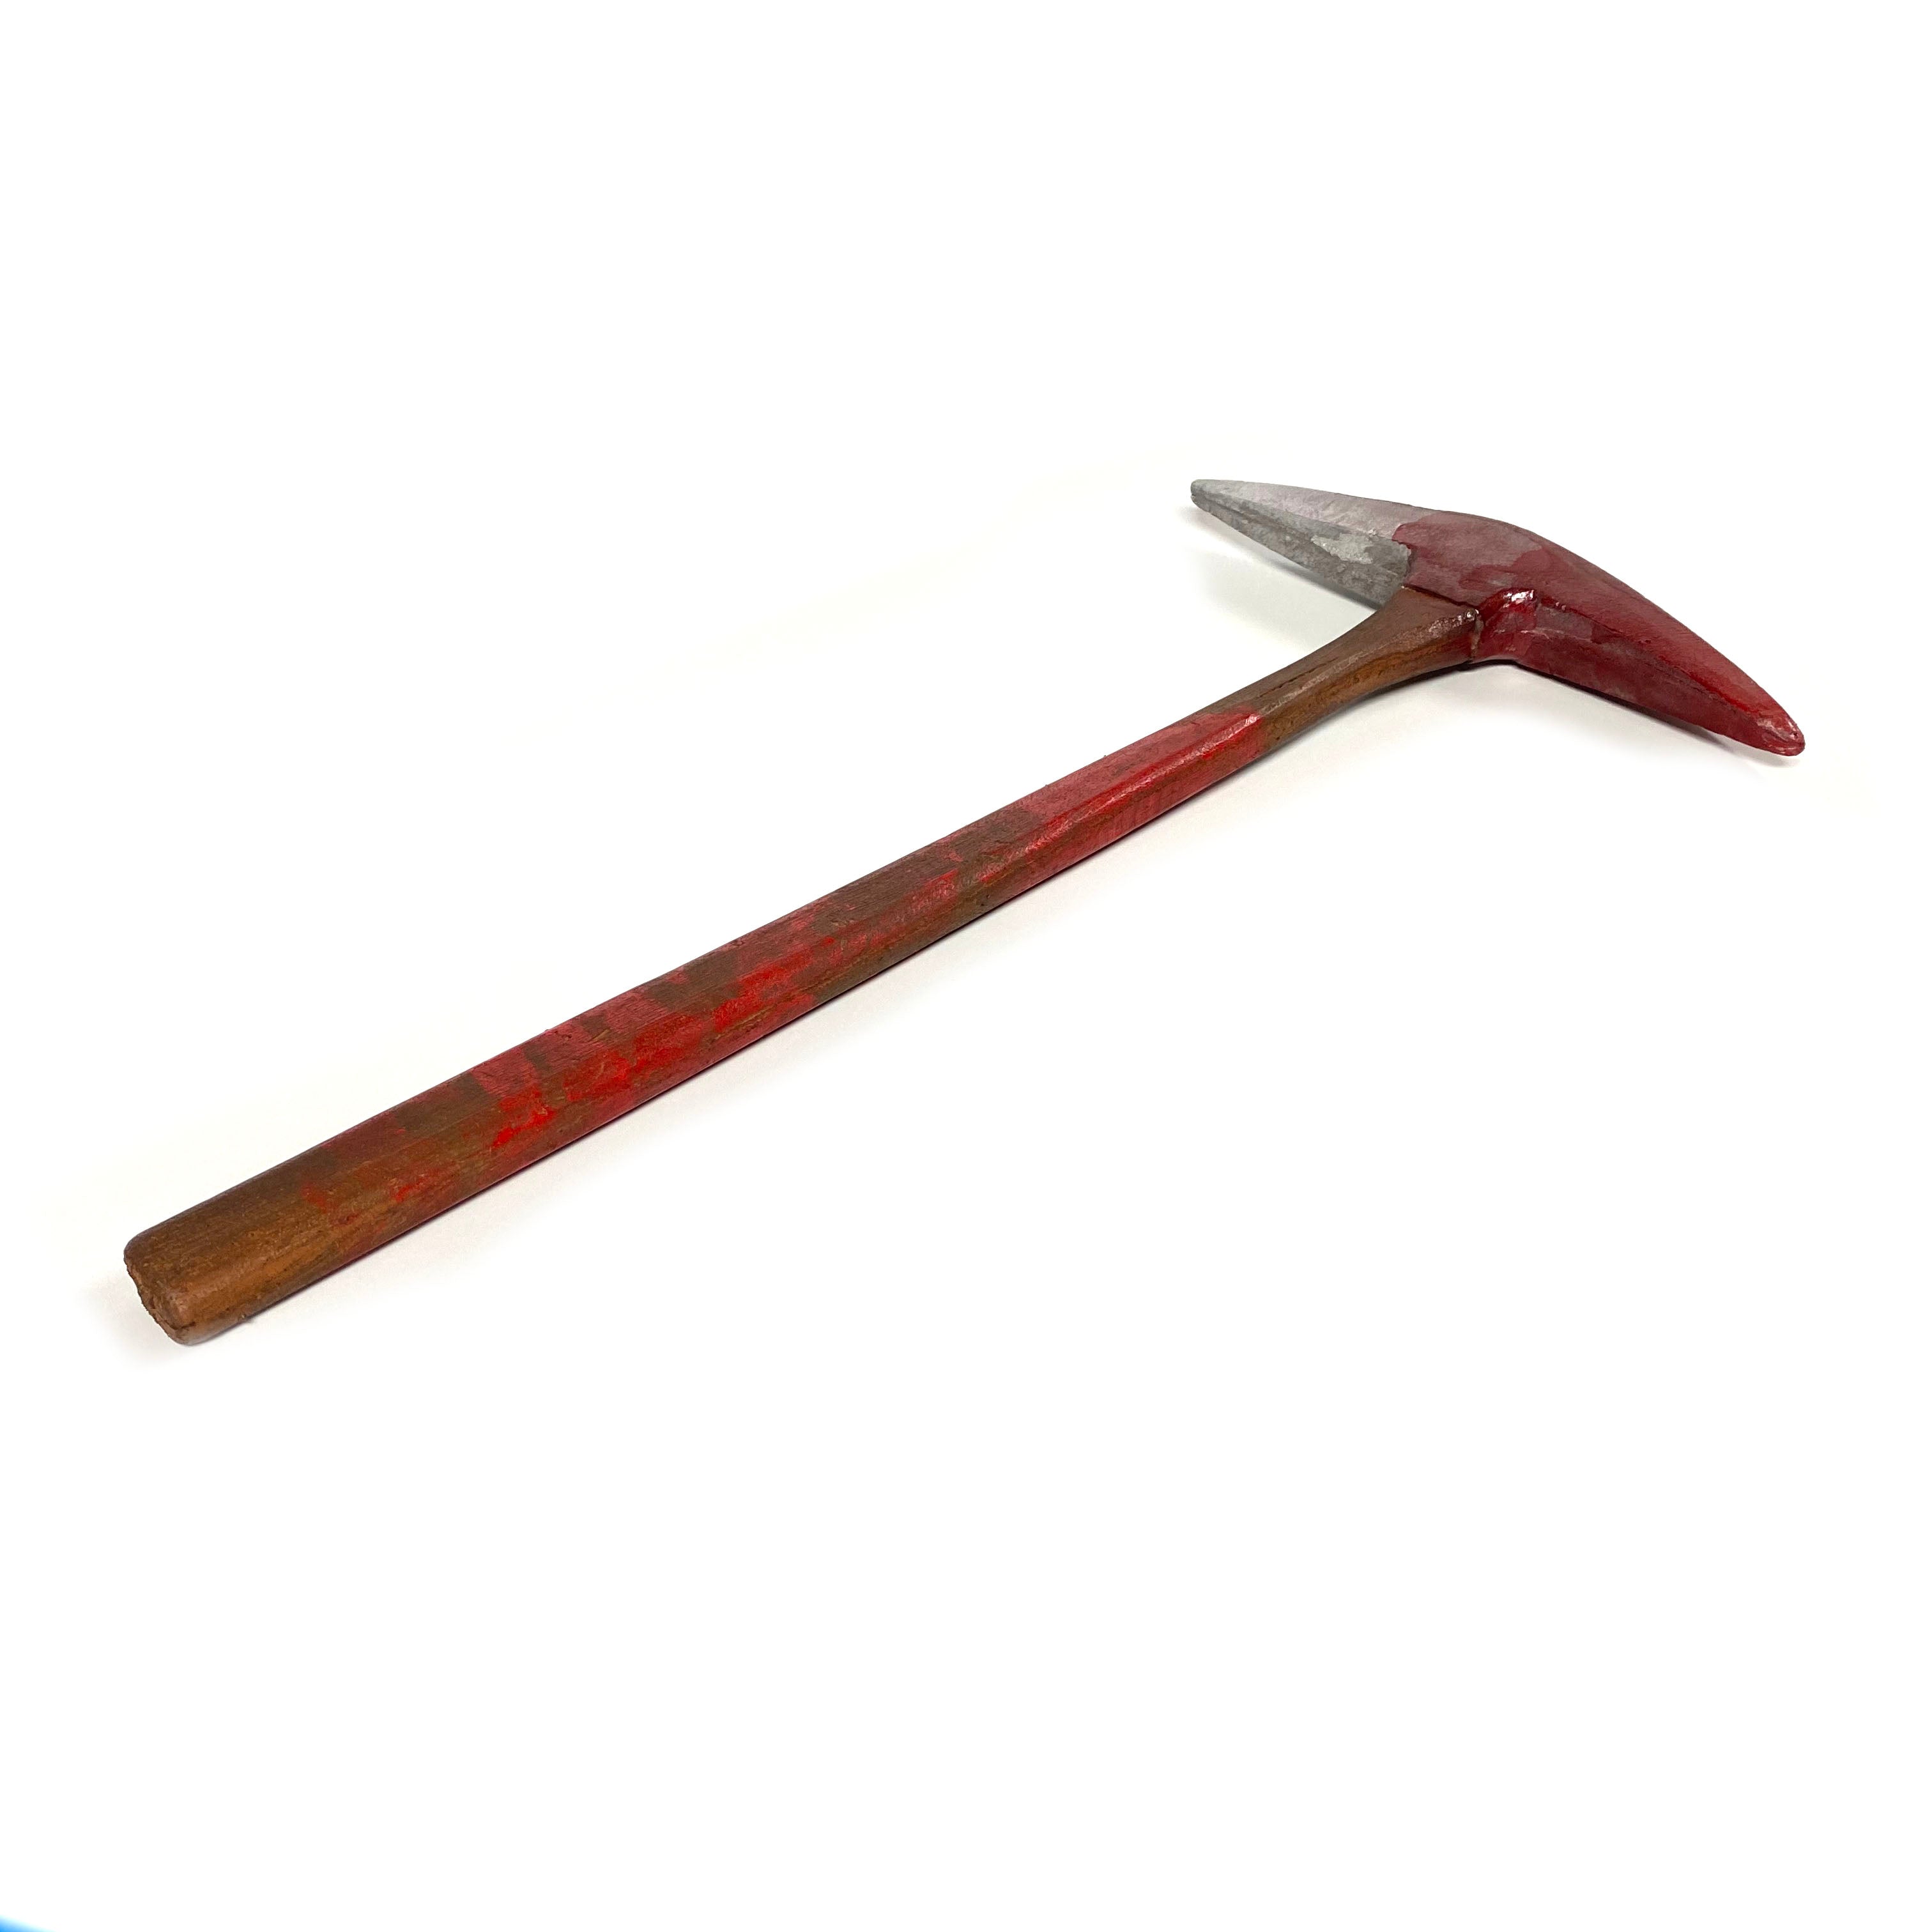 Foam Rubber Hand Pick Axe Stunt Prop - BLOODY - Bloodied Silver Head with Aged Handle